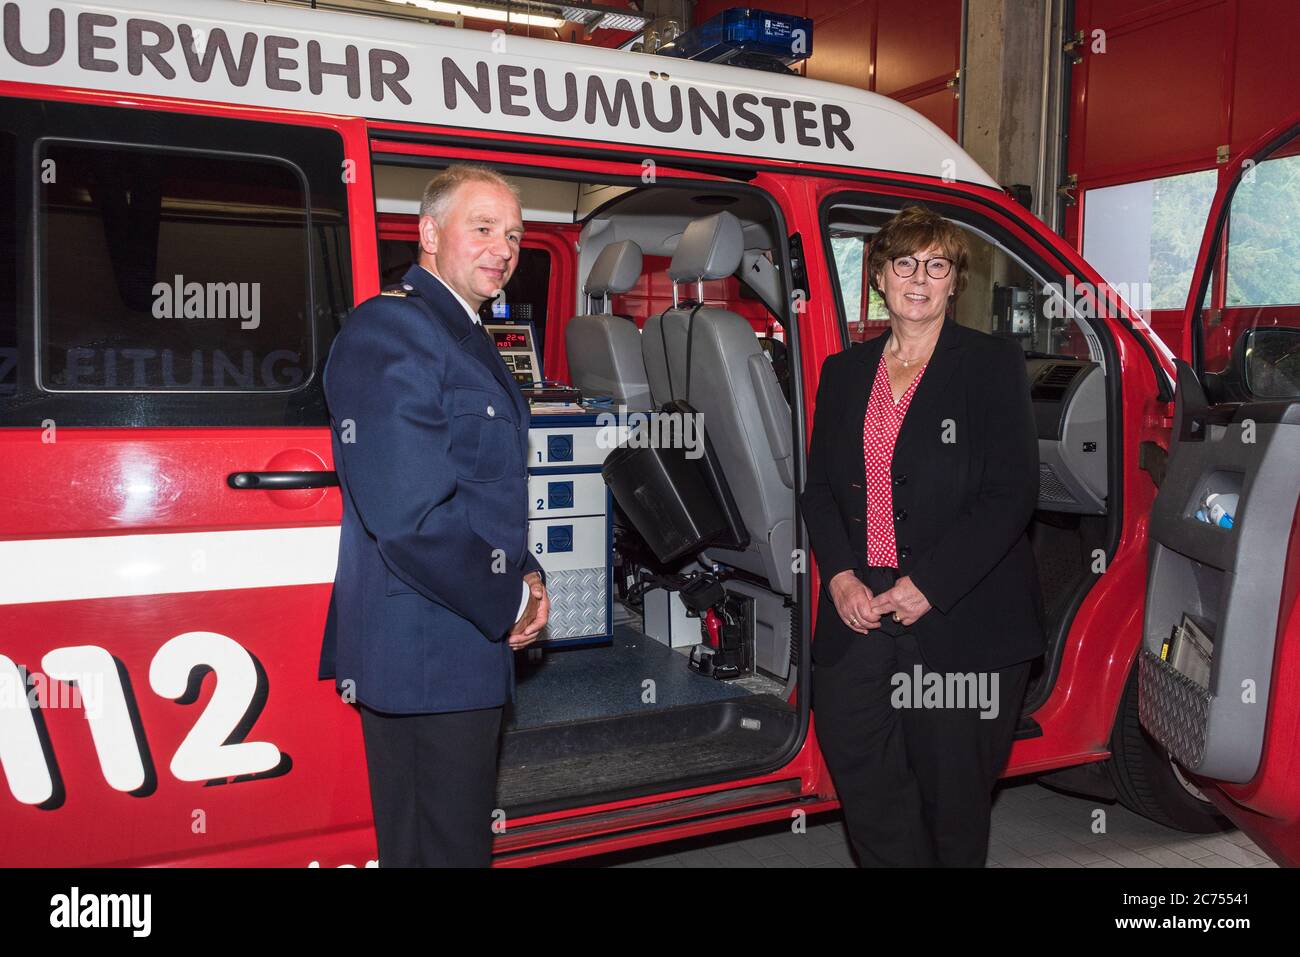 Neumünster, Germany, July 10, 2020 Schleswig-Holstein's Interior Minister Sabine Sütterlin-Waack, as part of her summer tour at the Neumünster security center today (July 14, 2020), found out about the cooperation between fire and disaster management and the relevant local management structures. 'In the Neumünster danger control center, you get to know the enormous range of our fire departments, emergency services and civil protection in full-time and volunteer work. Everything comes together here and everyone works together to help and save people. Credit: Penofoto/Alamy Live News Stock Photo